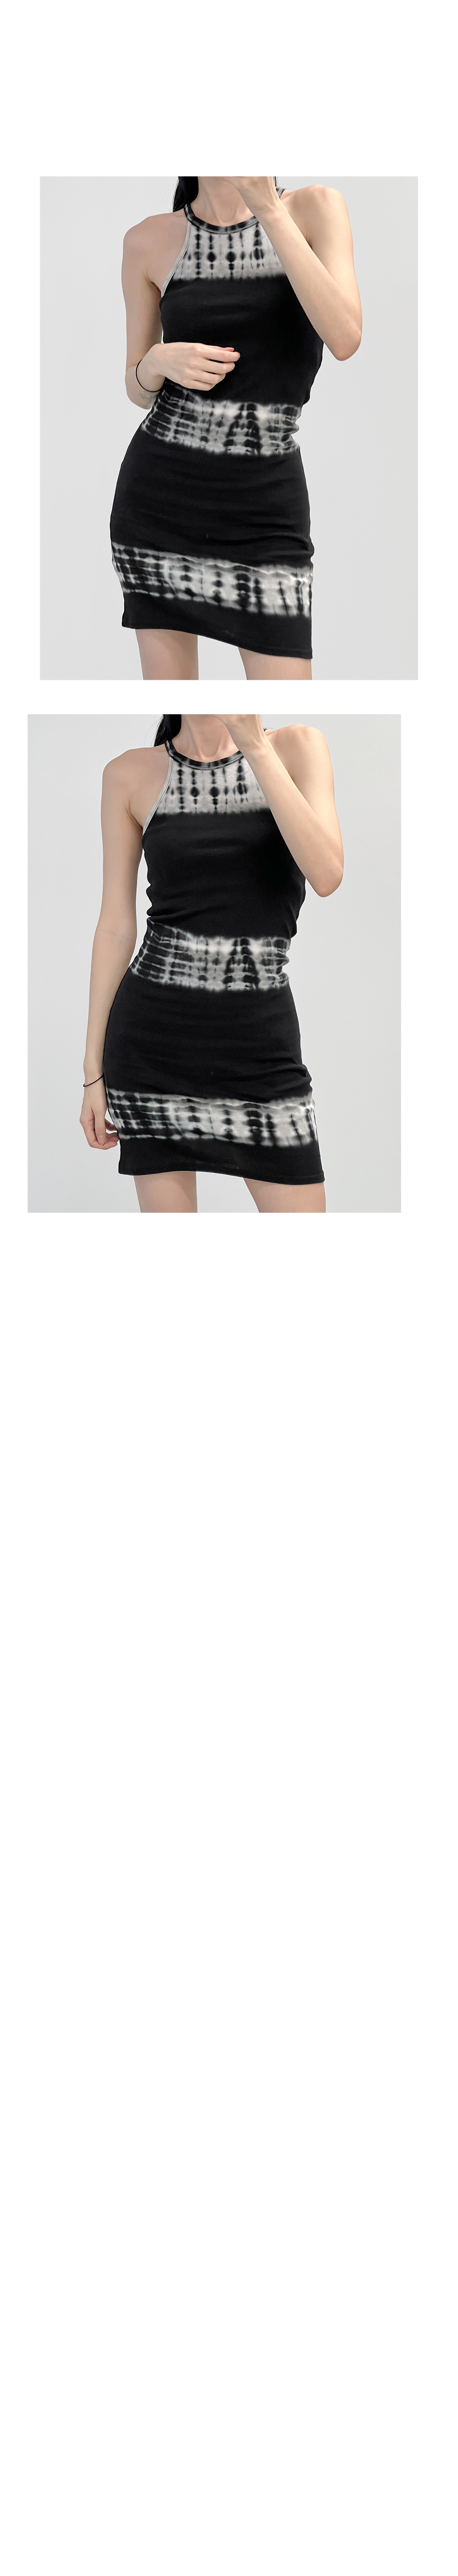 sleeveless charcoal color image-S1L8